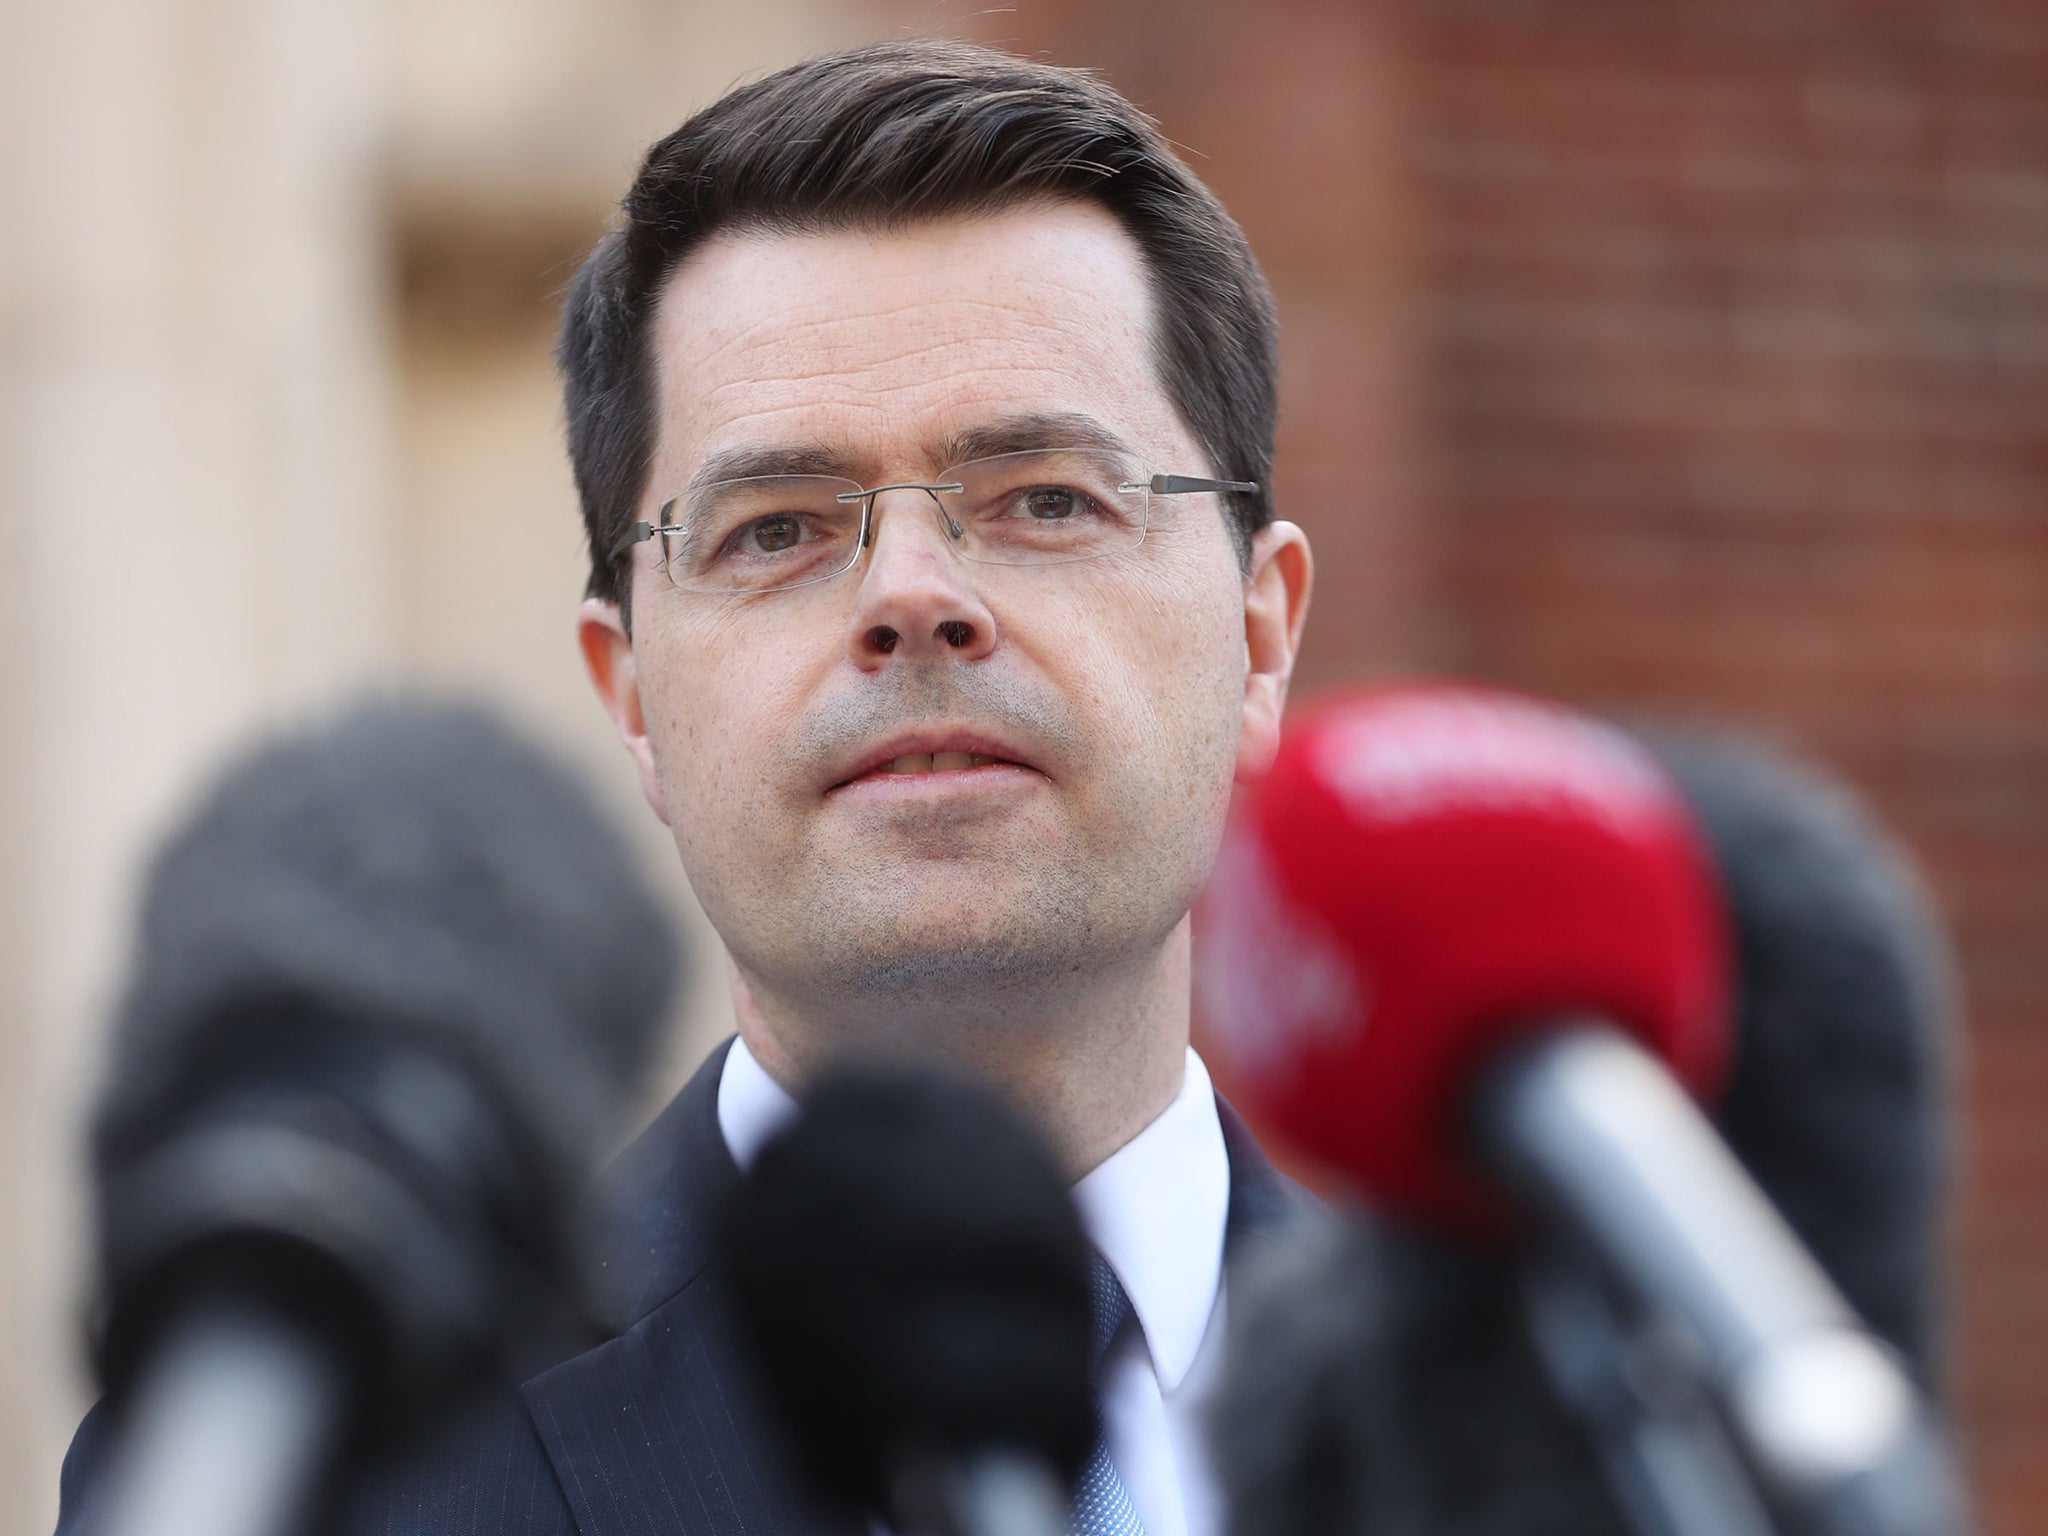 Security minister James Brokenshire said the law did not allow CHIS sources to commit any crime